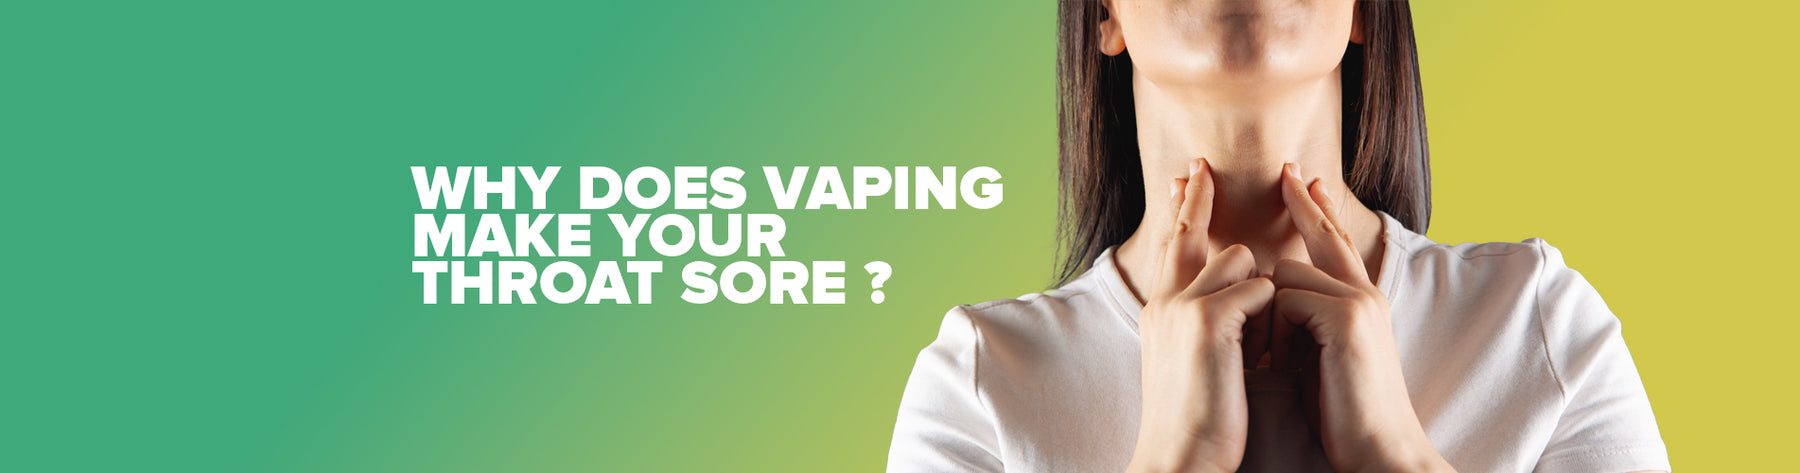 Why Does Vaping Make Your Sore Throat?